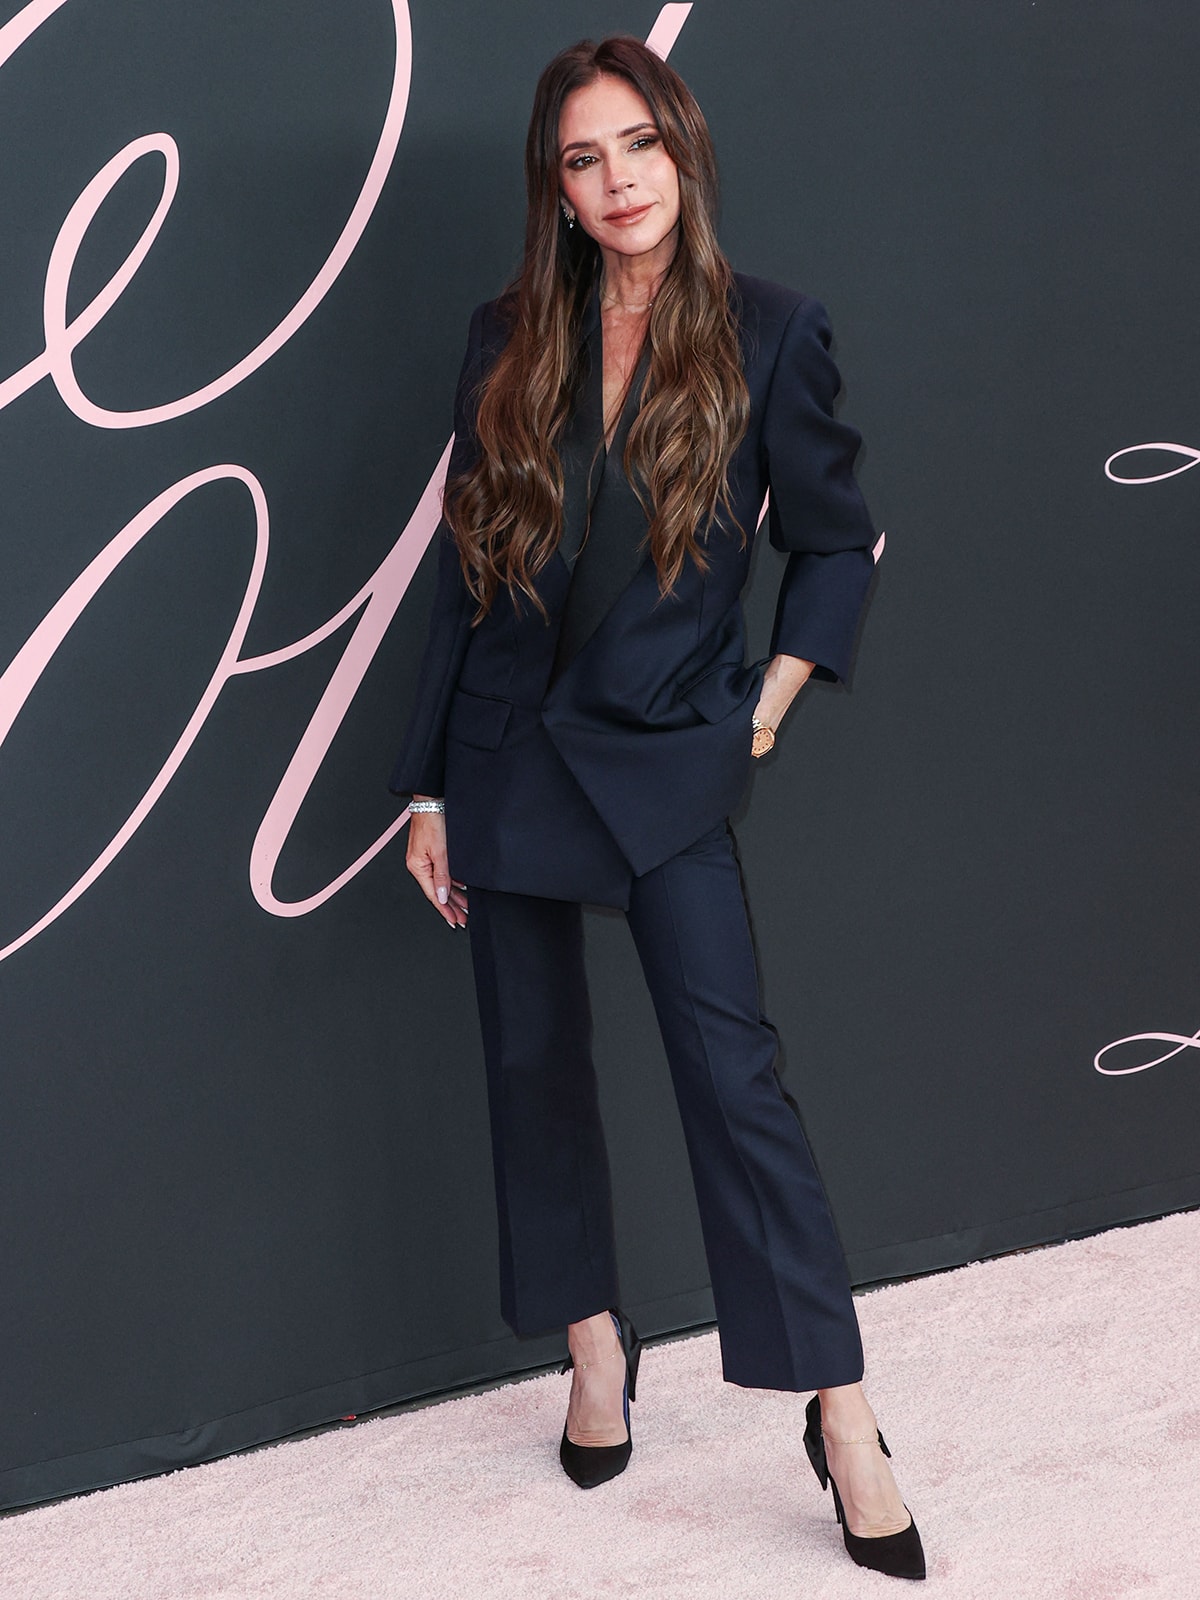 Victoria Beckham opts for understated elegance in a navy pantsuit from her eponymous collection